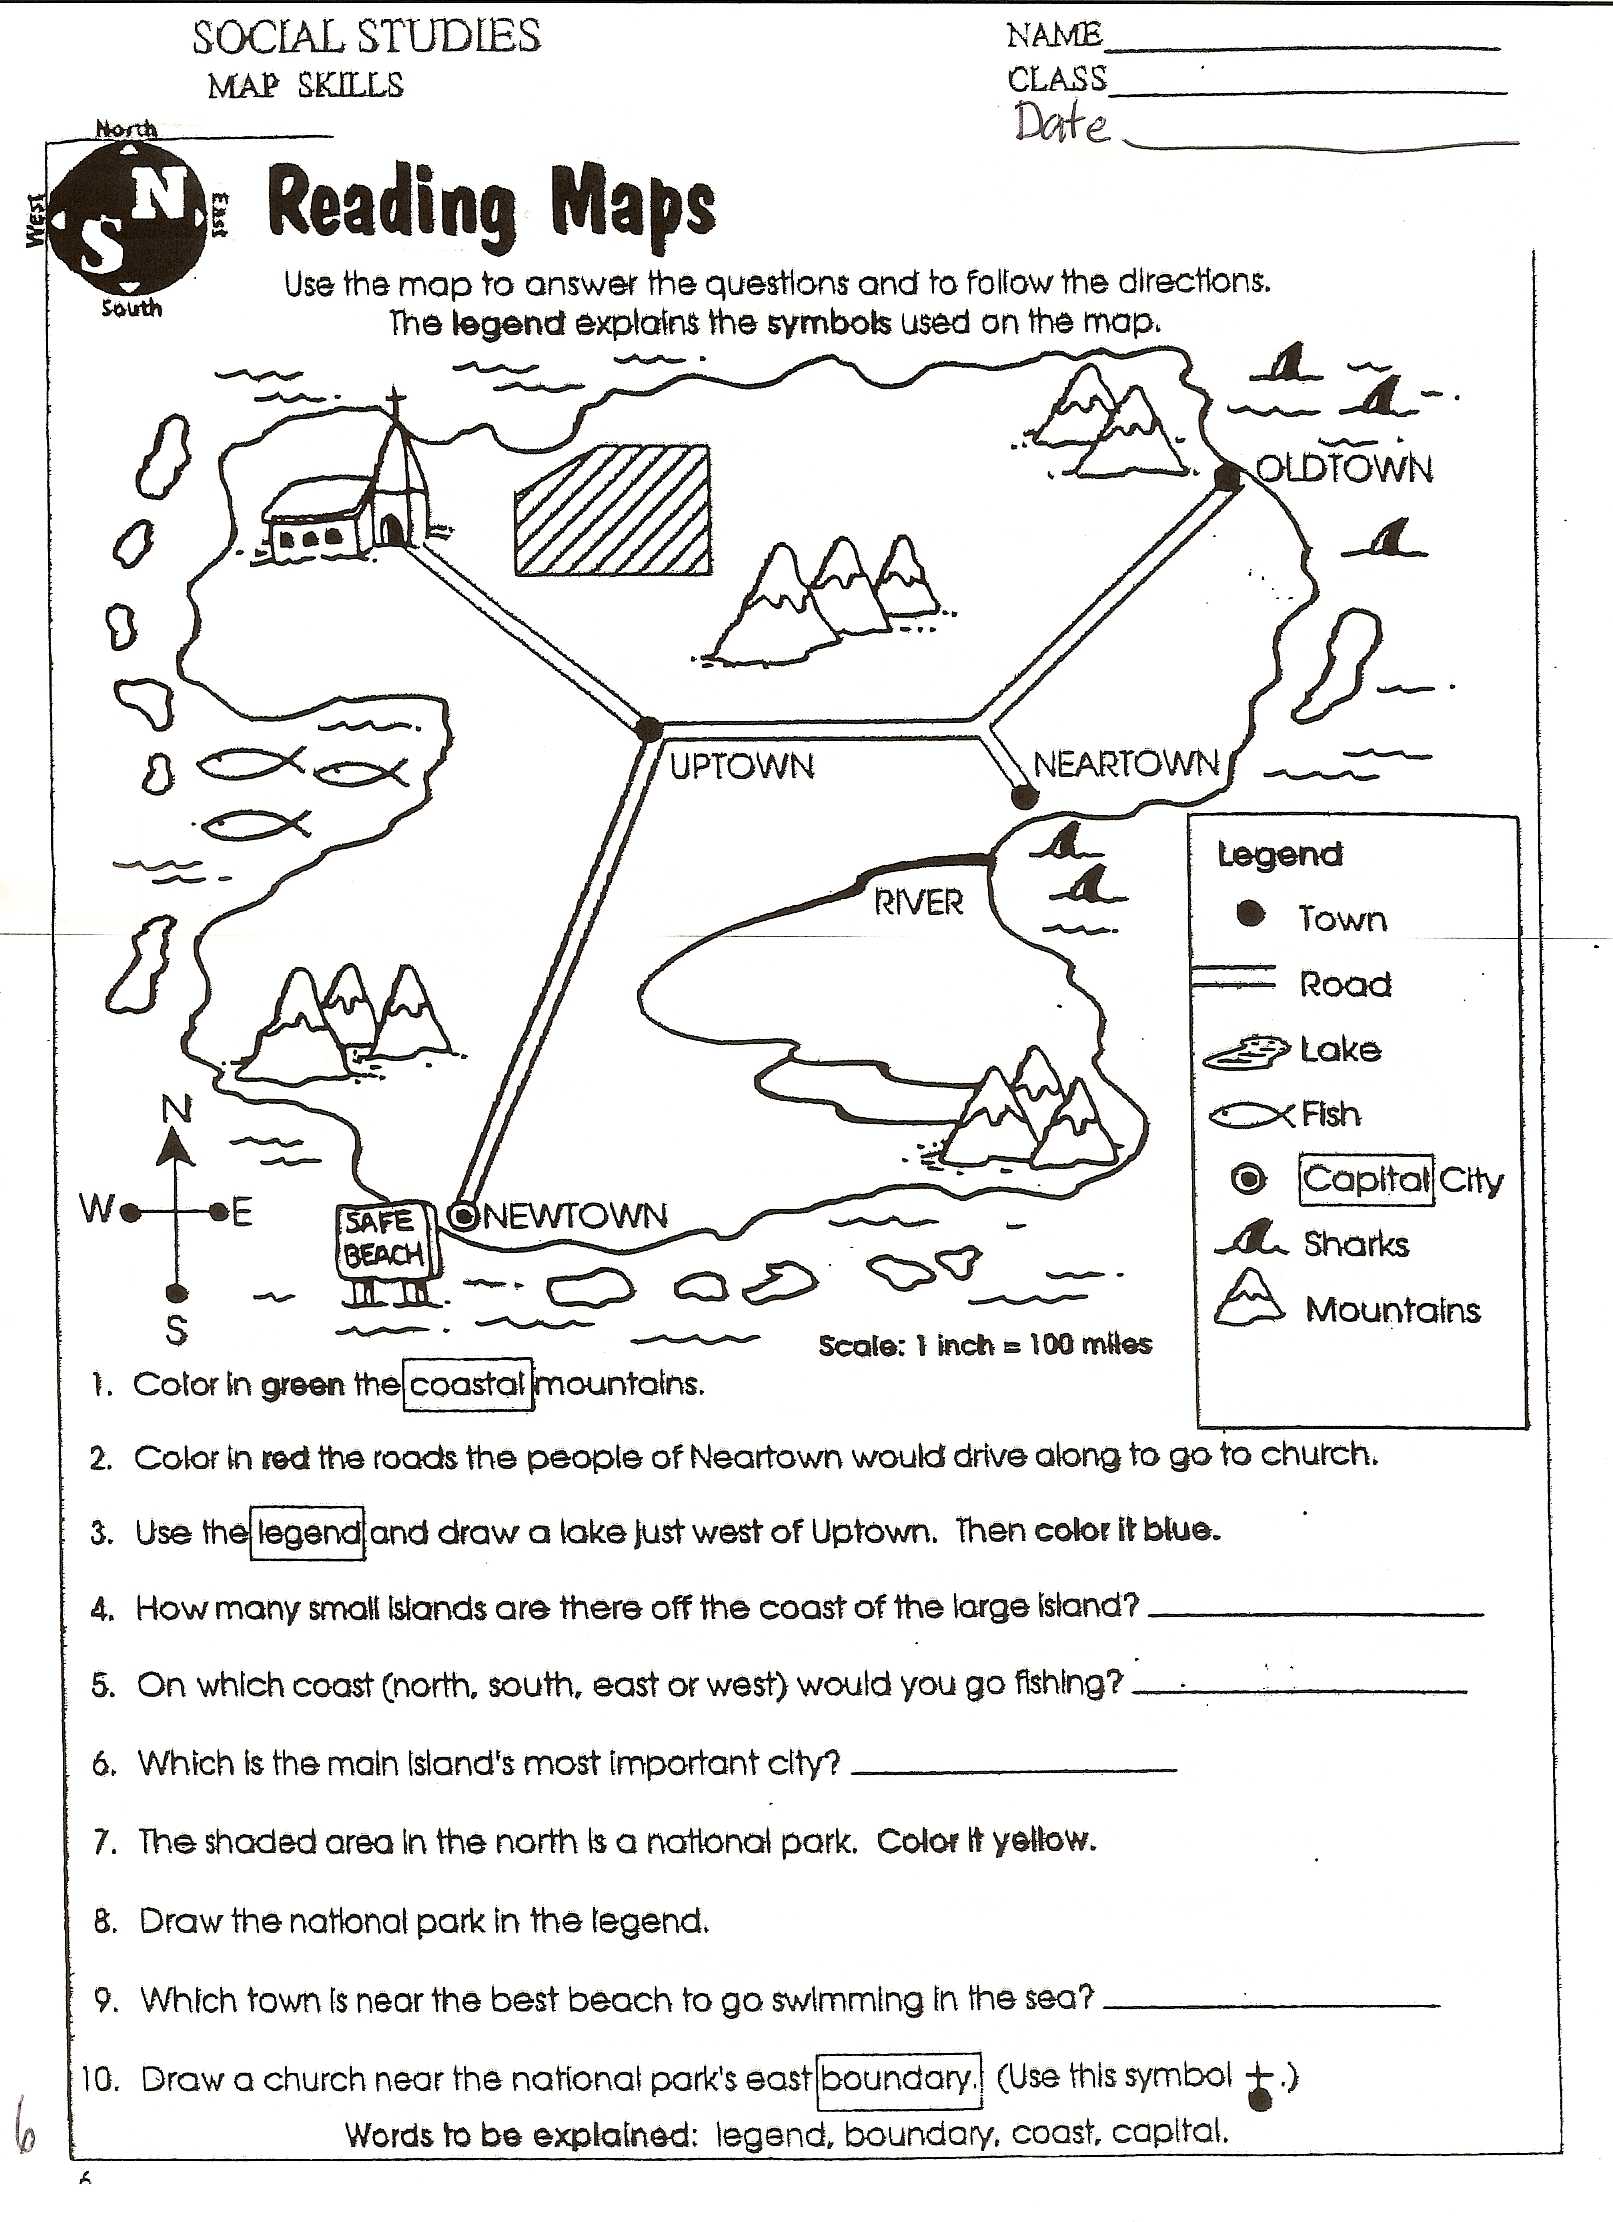 Reading A Weather Map Worksheet Answer Key together with Reading Maps Worksheet the Best Worksheets Image Collection